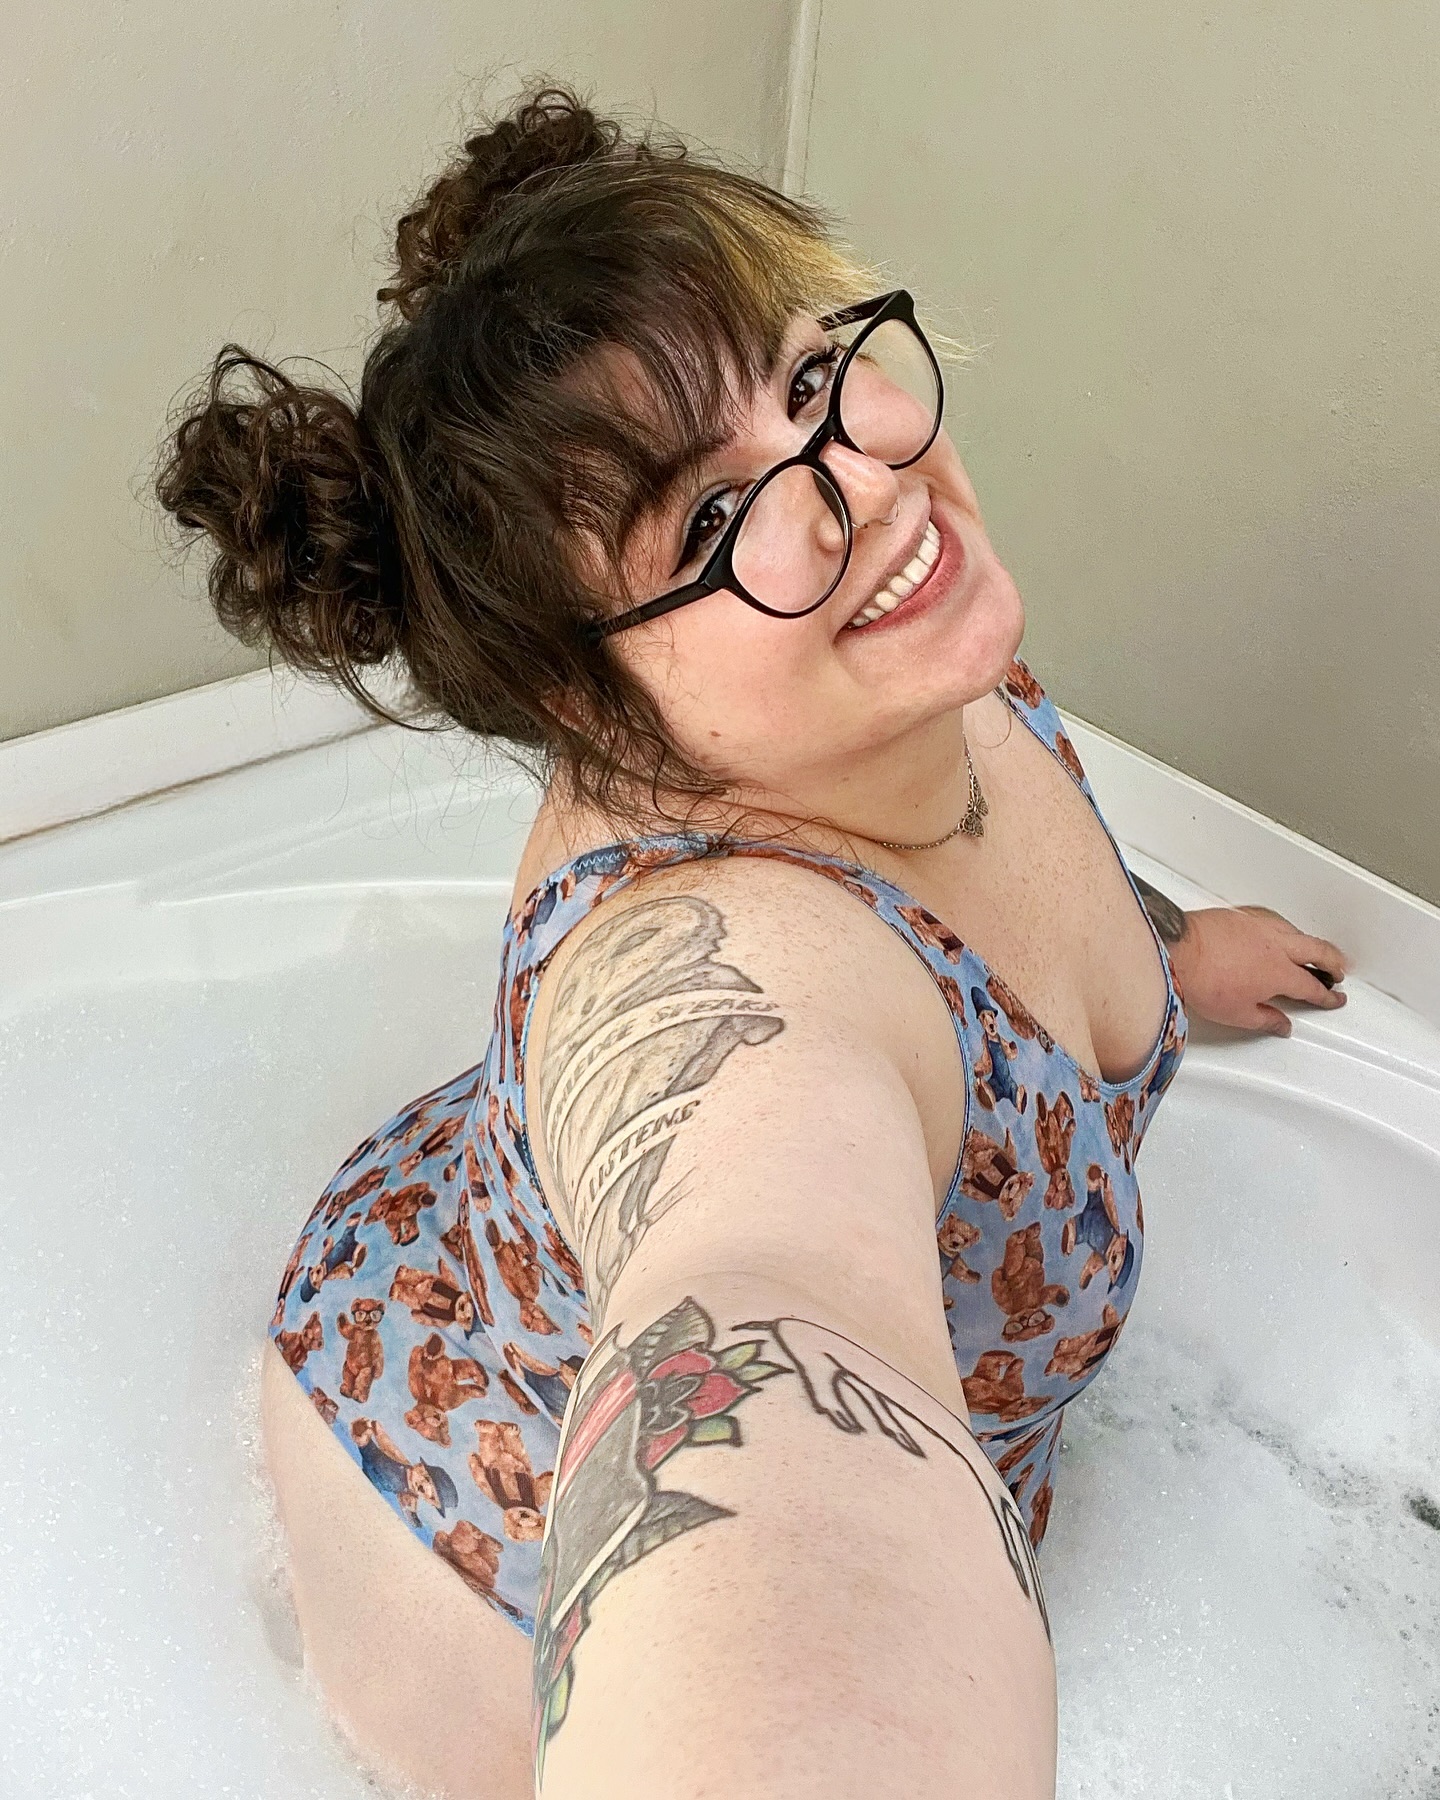 Happy Thursday! Drink your water so you’re not so thirsty 😉 
/
/
#plussize #plussizebeauty #plussizemodel #spacebuns #bubblebath #biggirlsarebeautiful #thickums #curlyhair #girlswithtattoos #altgirl #tattoos #fatandtattooed